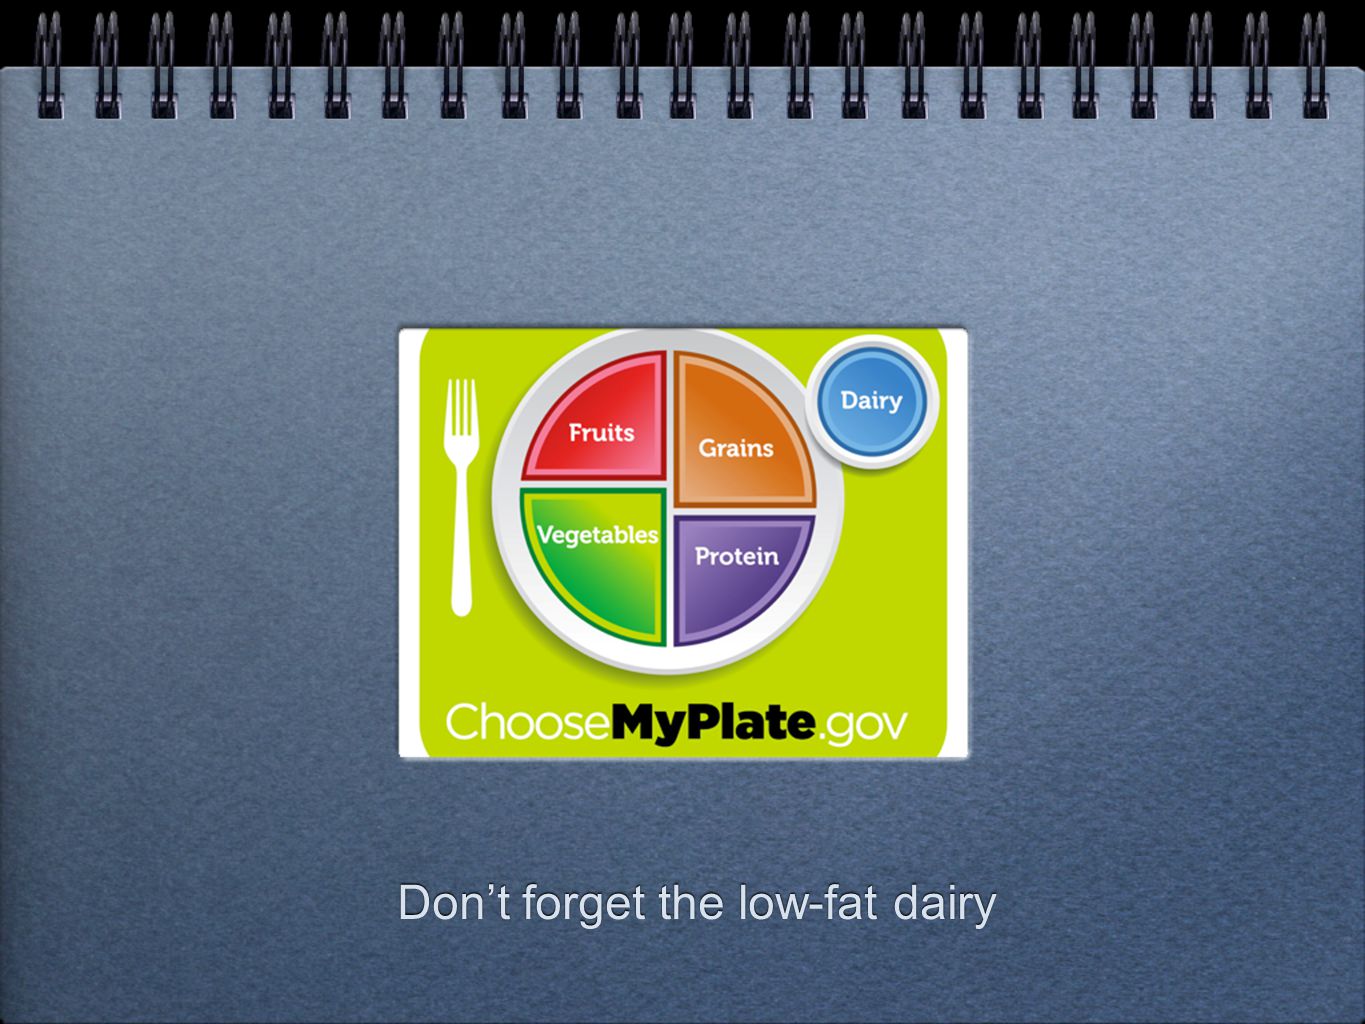 Don’t forget the low-fat dairy